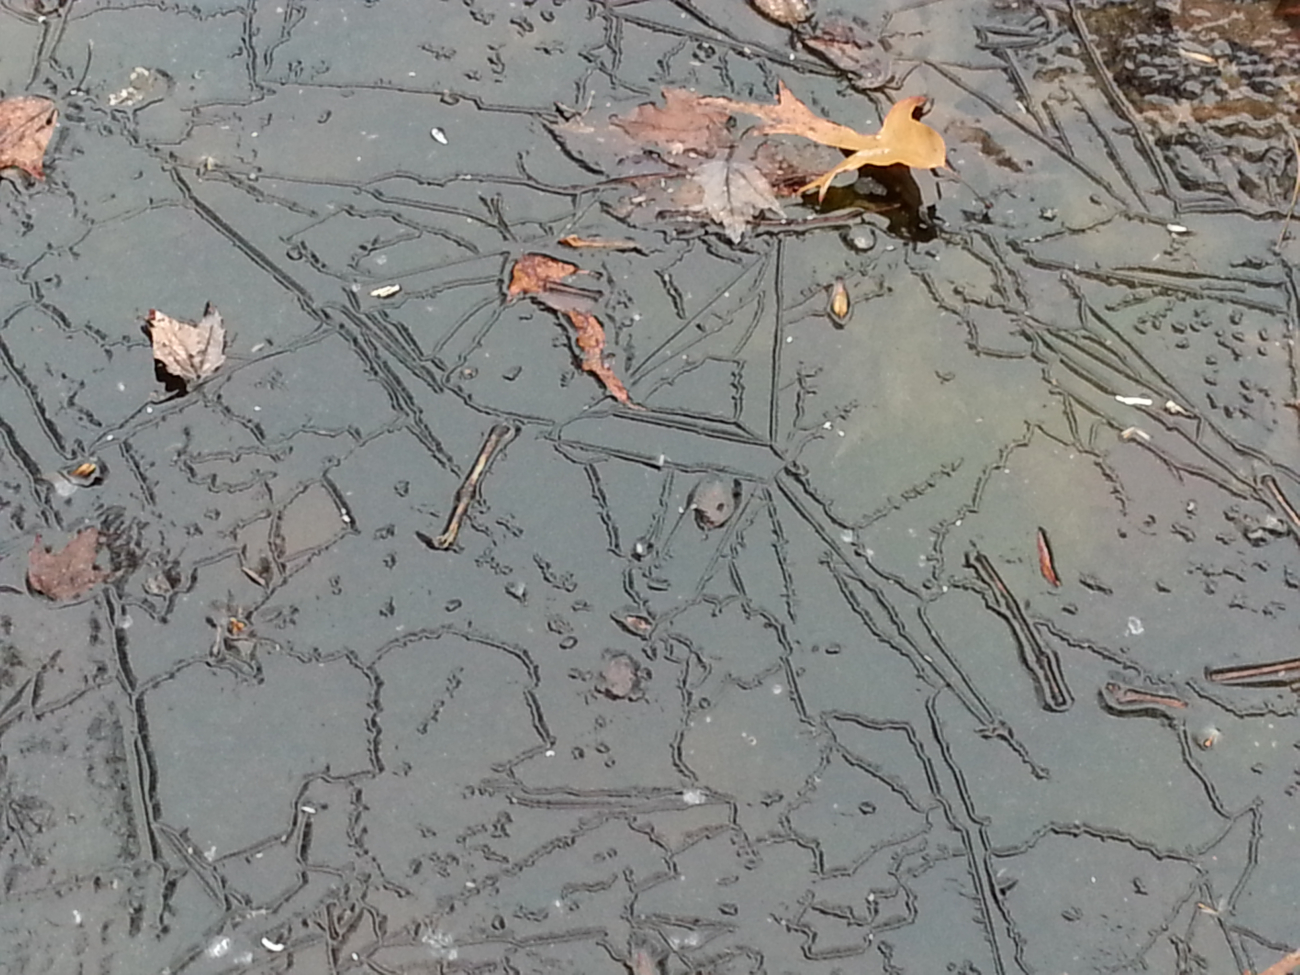 Ice patterns in shallow water